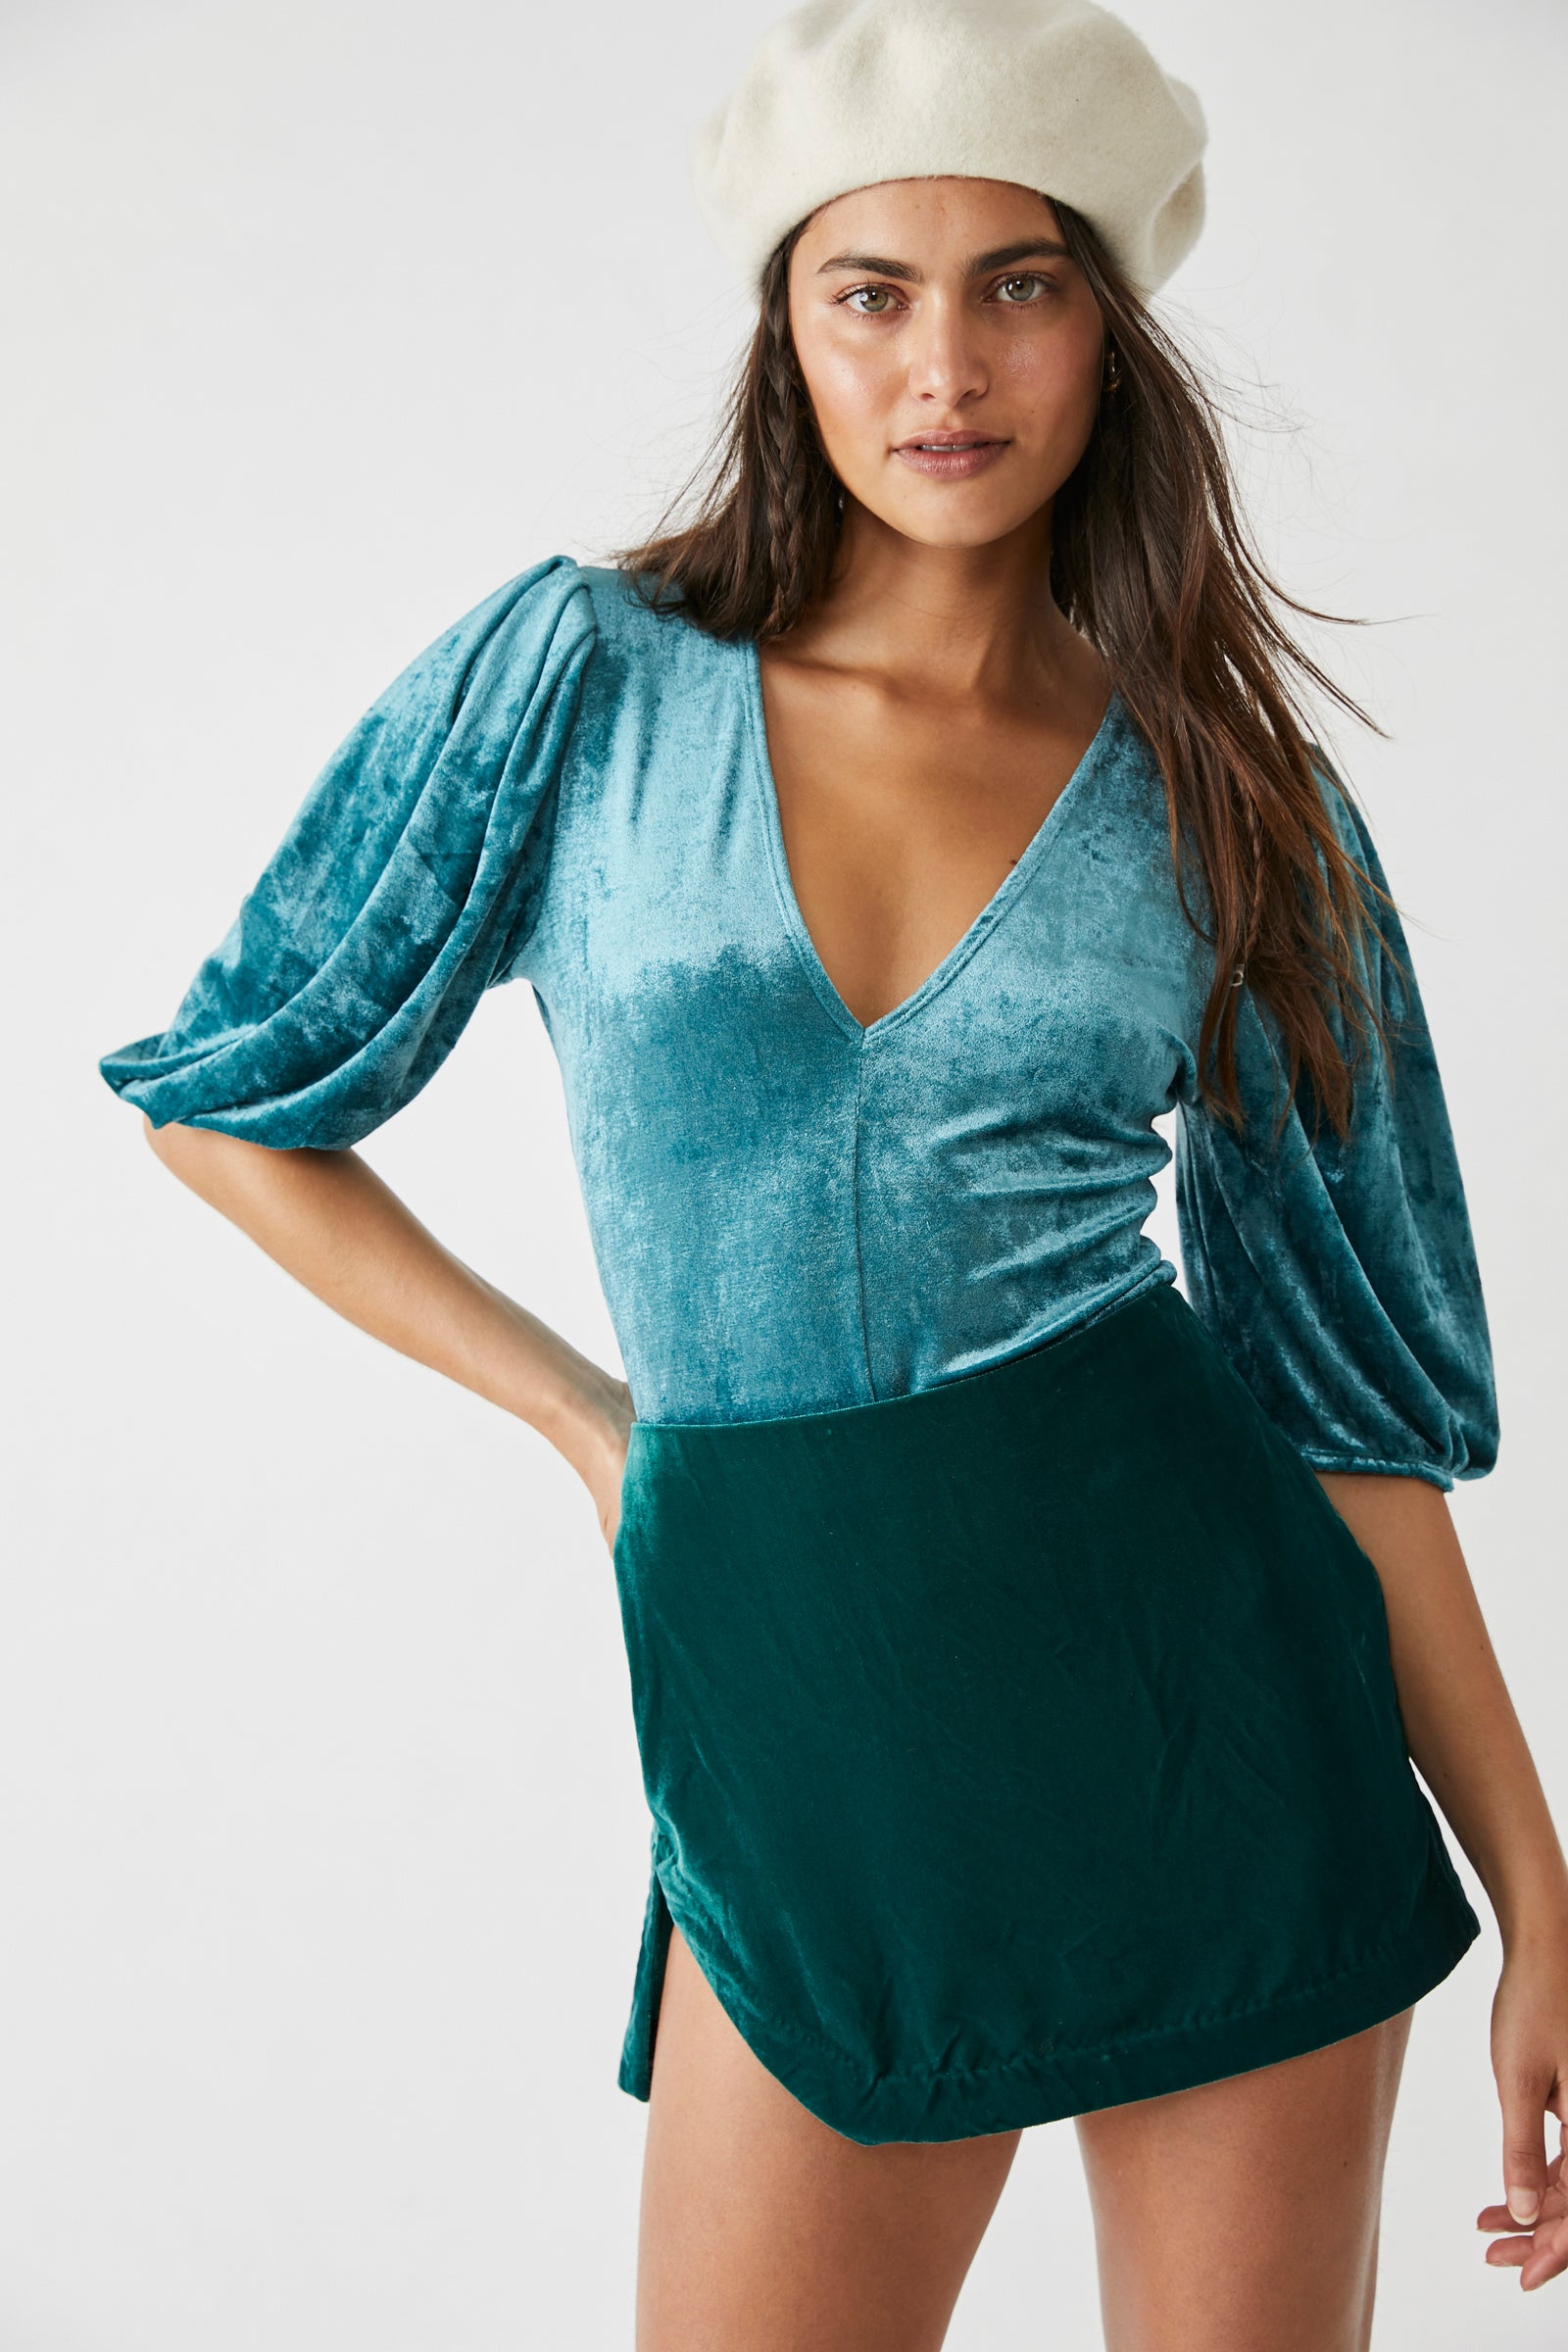 FREE PEOPLE DON'T YOU WISH BODYSUIT IN DEEP TEAL